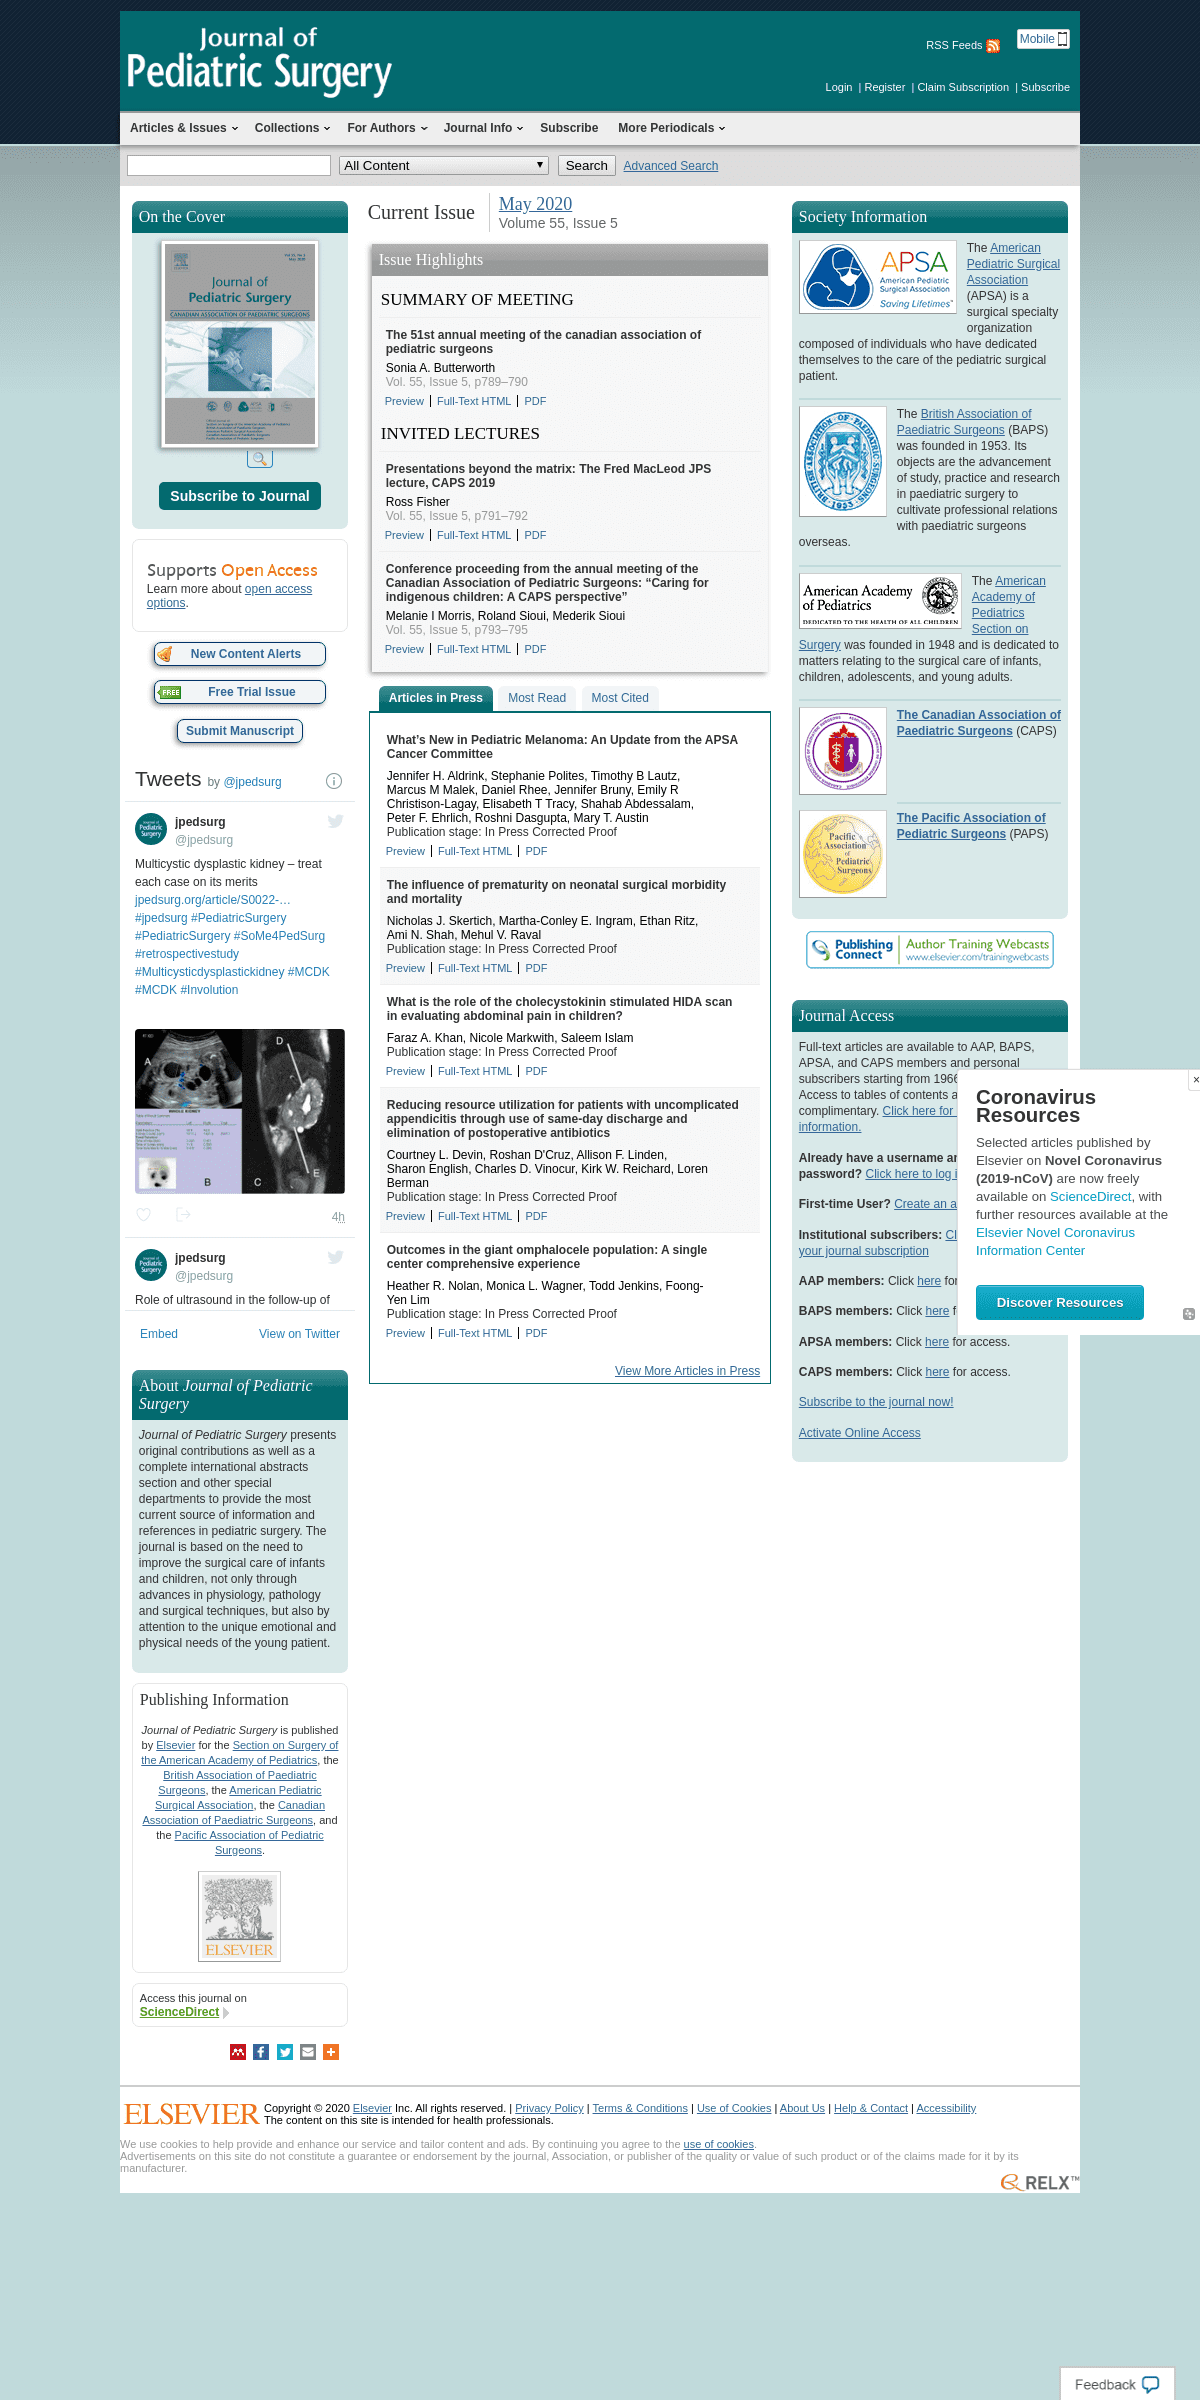 A complete backup of jpedsurg.org